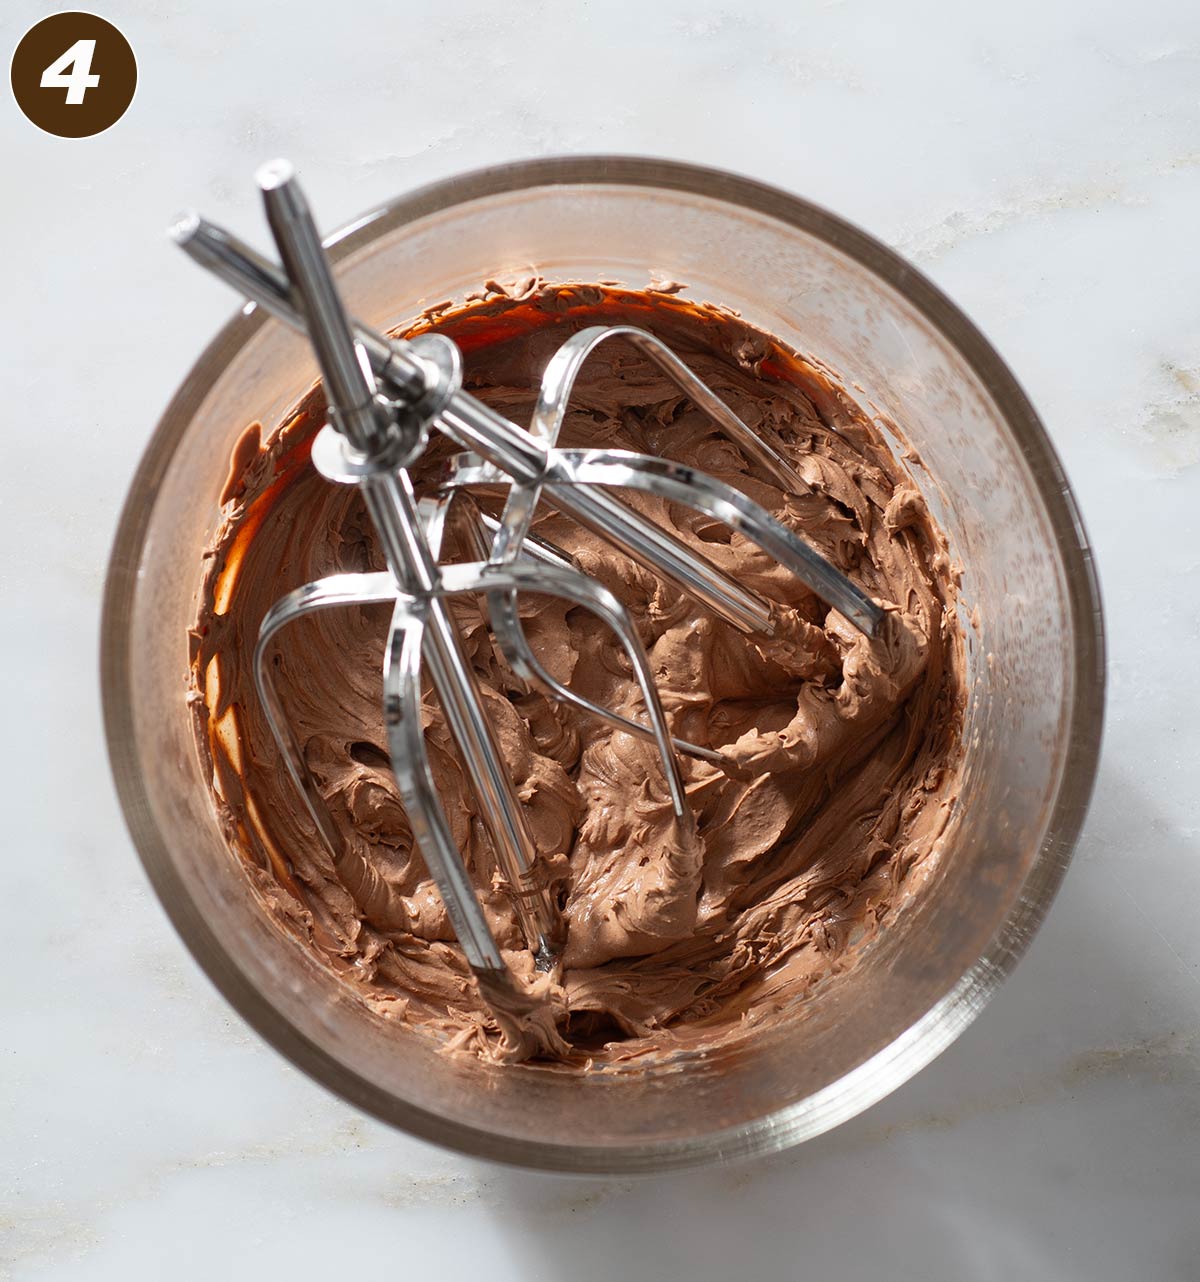 Whipped chocolate mousse frosting in a bowl.